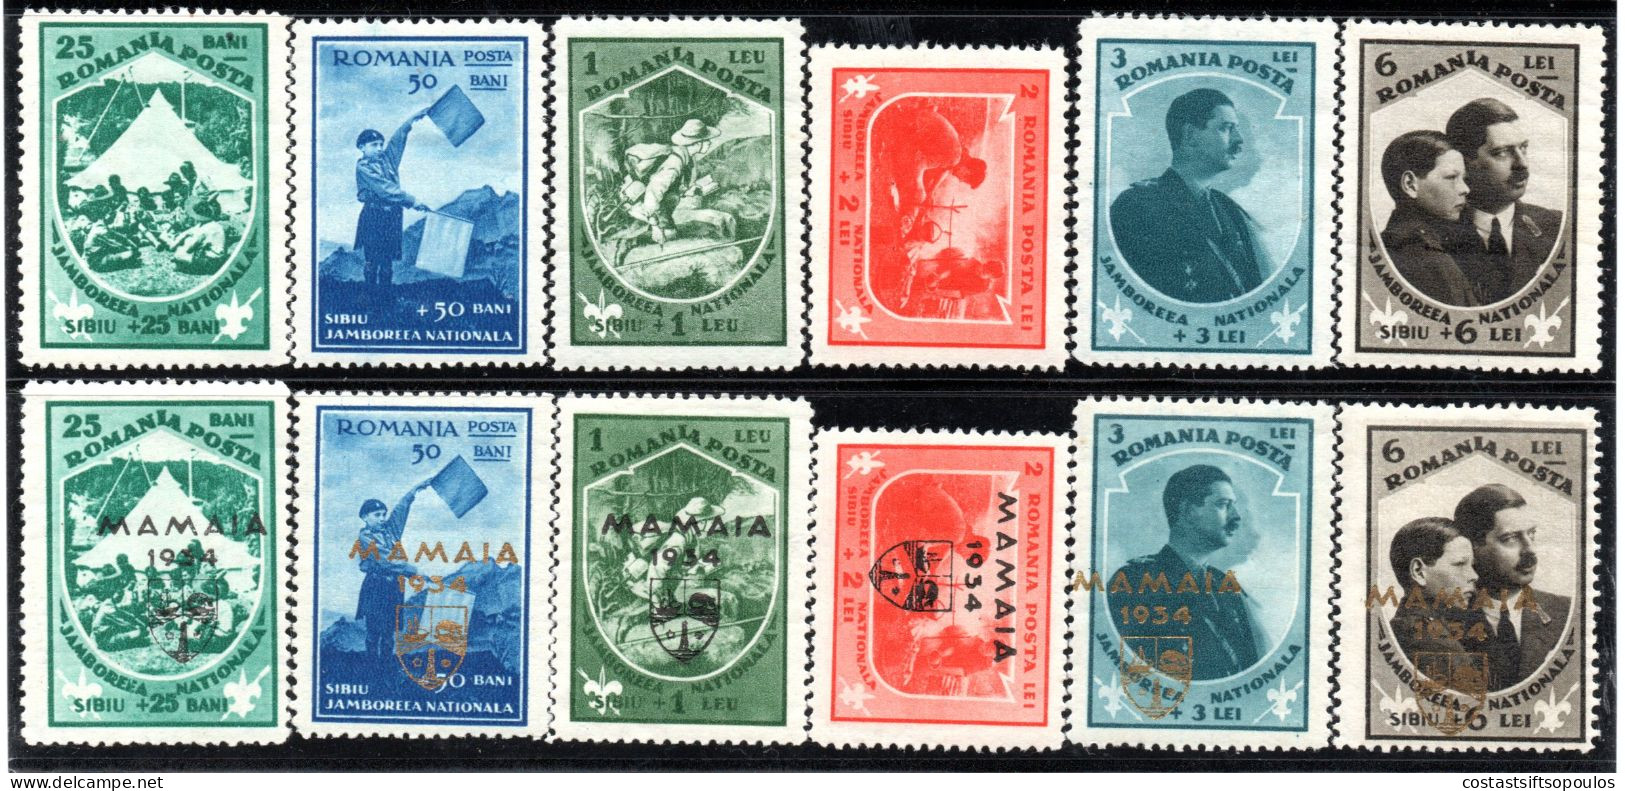 3020. ROMANIA 1932-1934  BOY SCOUT JAMBOREE ISSUES MNH/MH - Unused Stamps